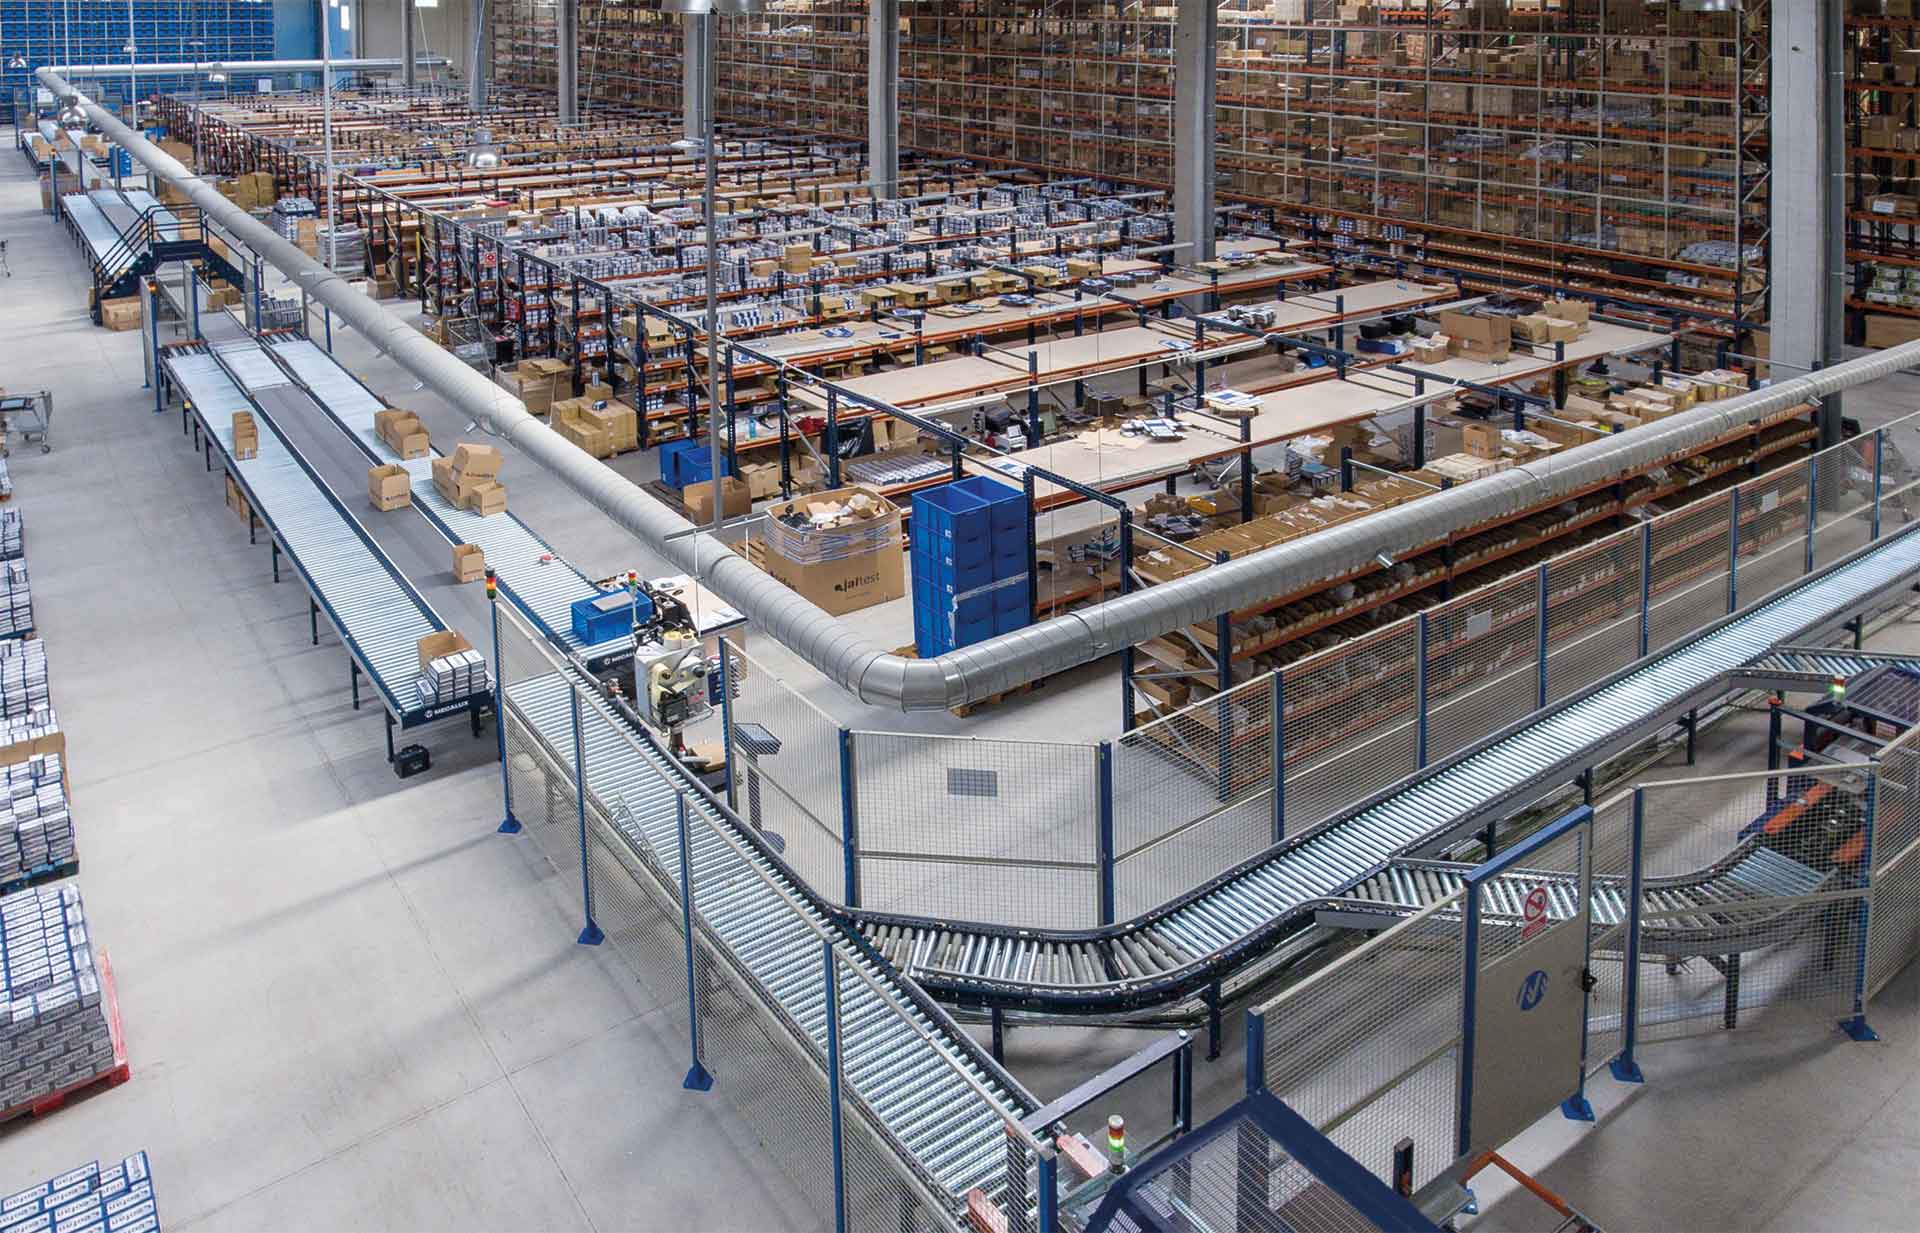 Systems such as pallet racks or stacker cranes enabling warehouse storage optimization